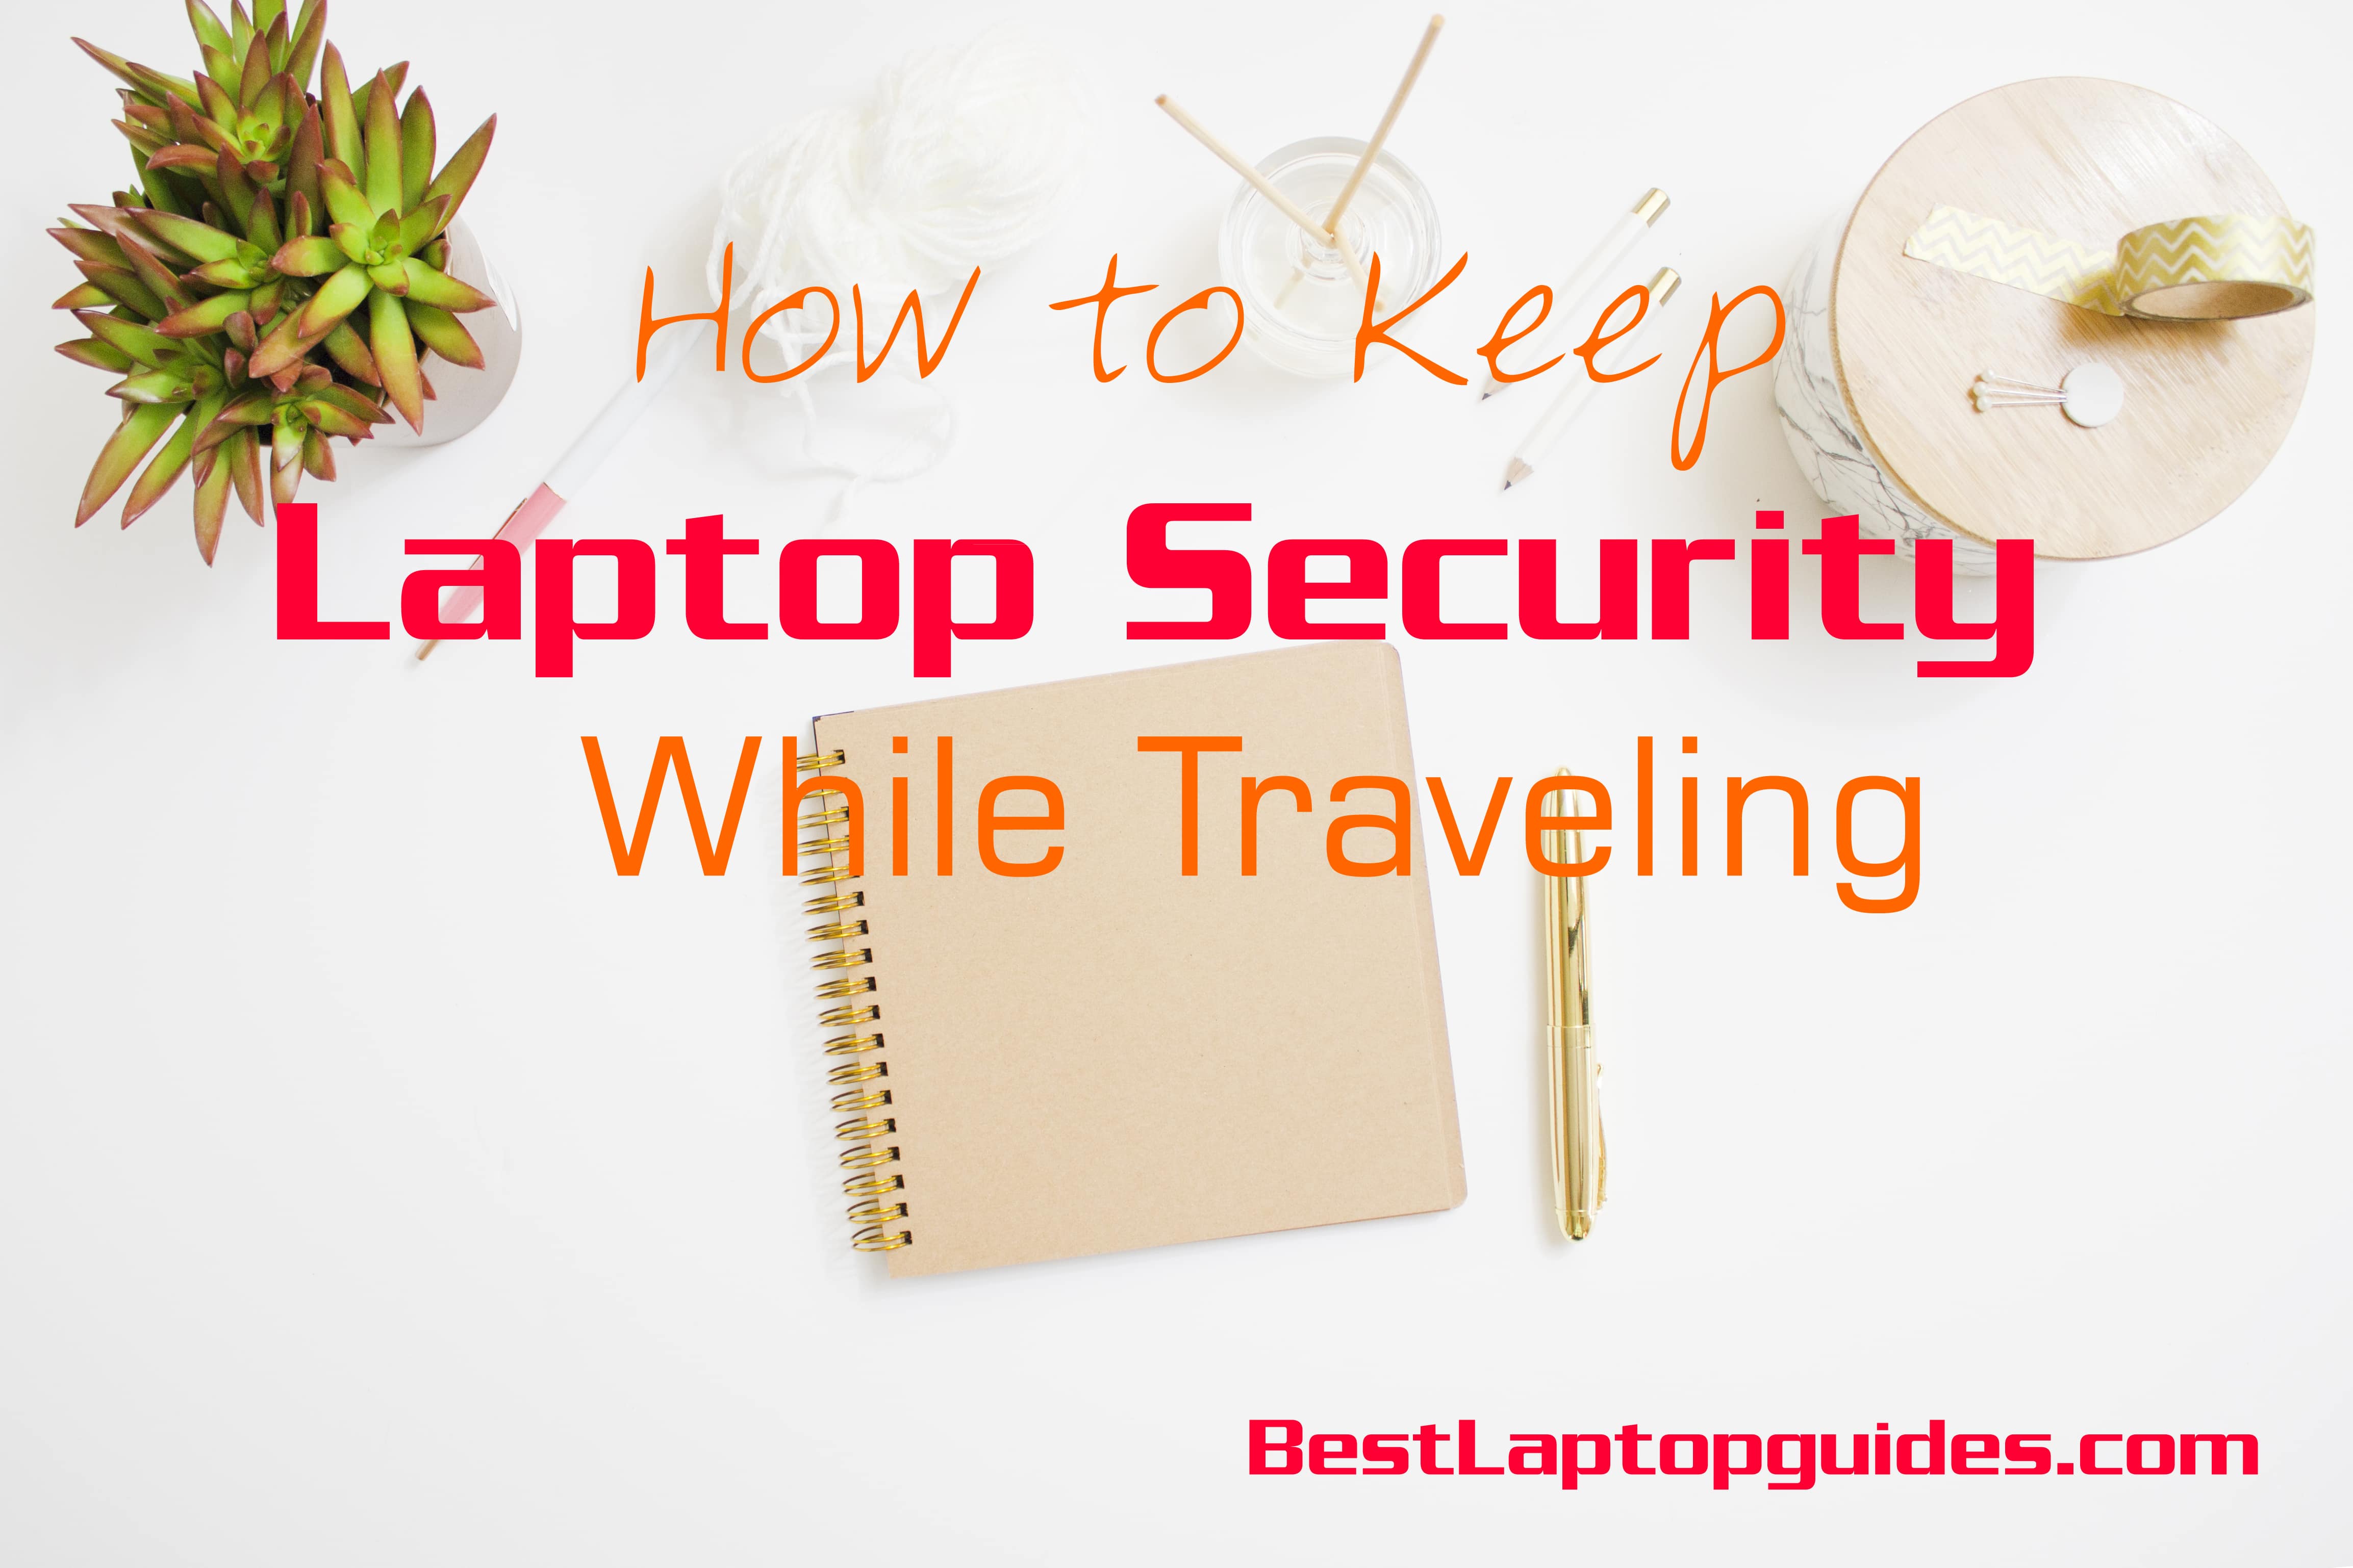 laptop security while traveling